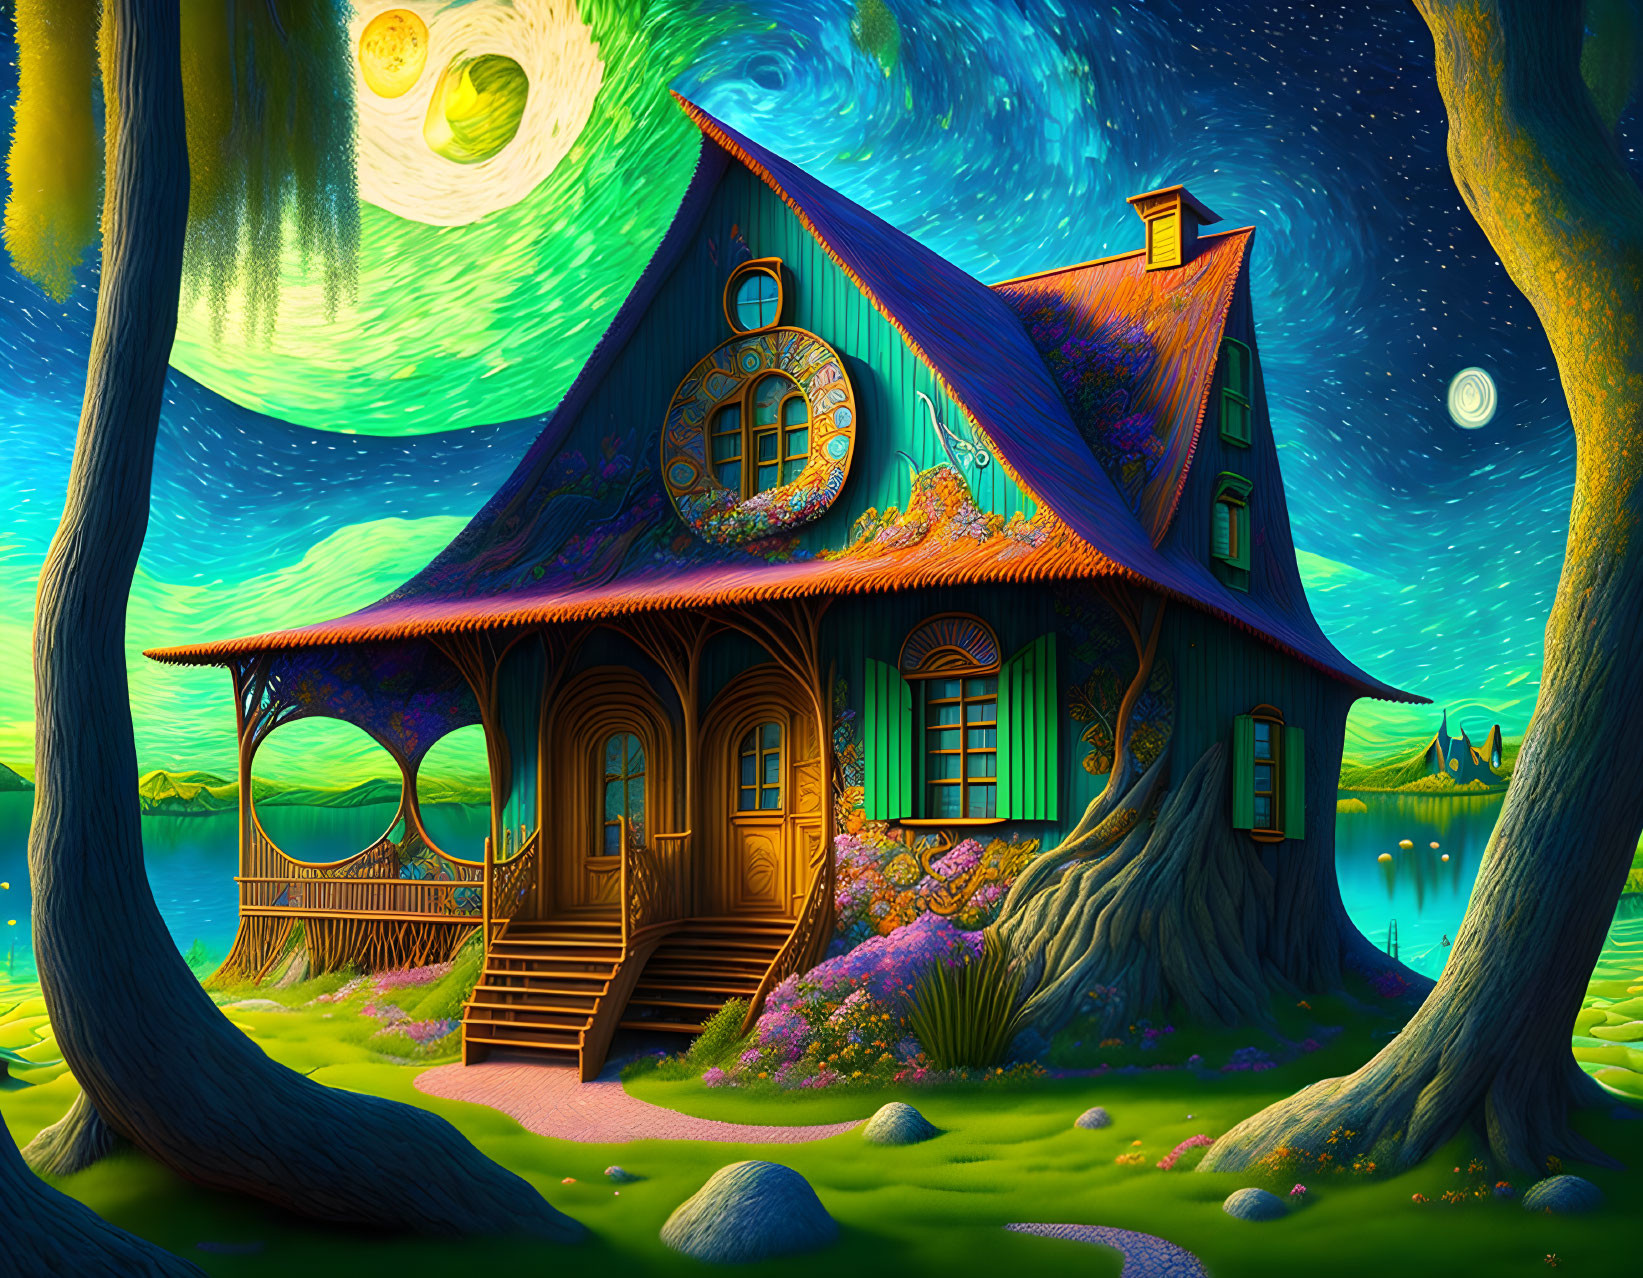 Nocturnal house